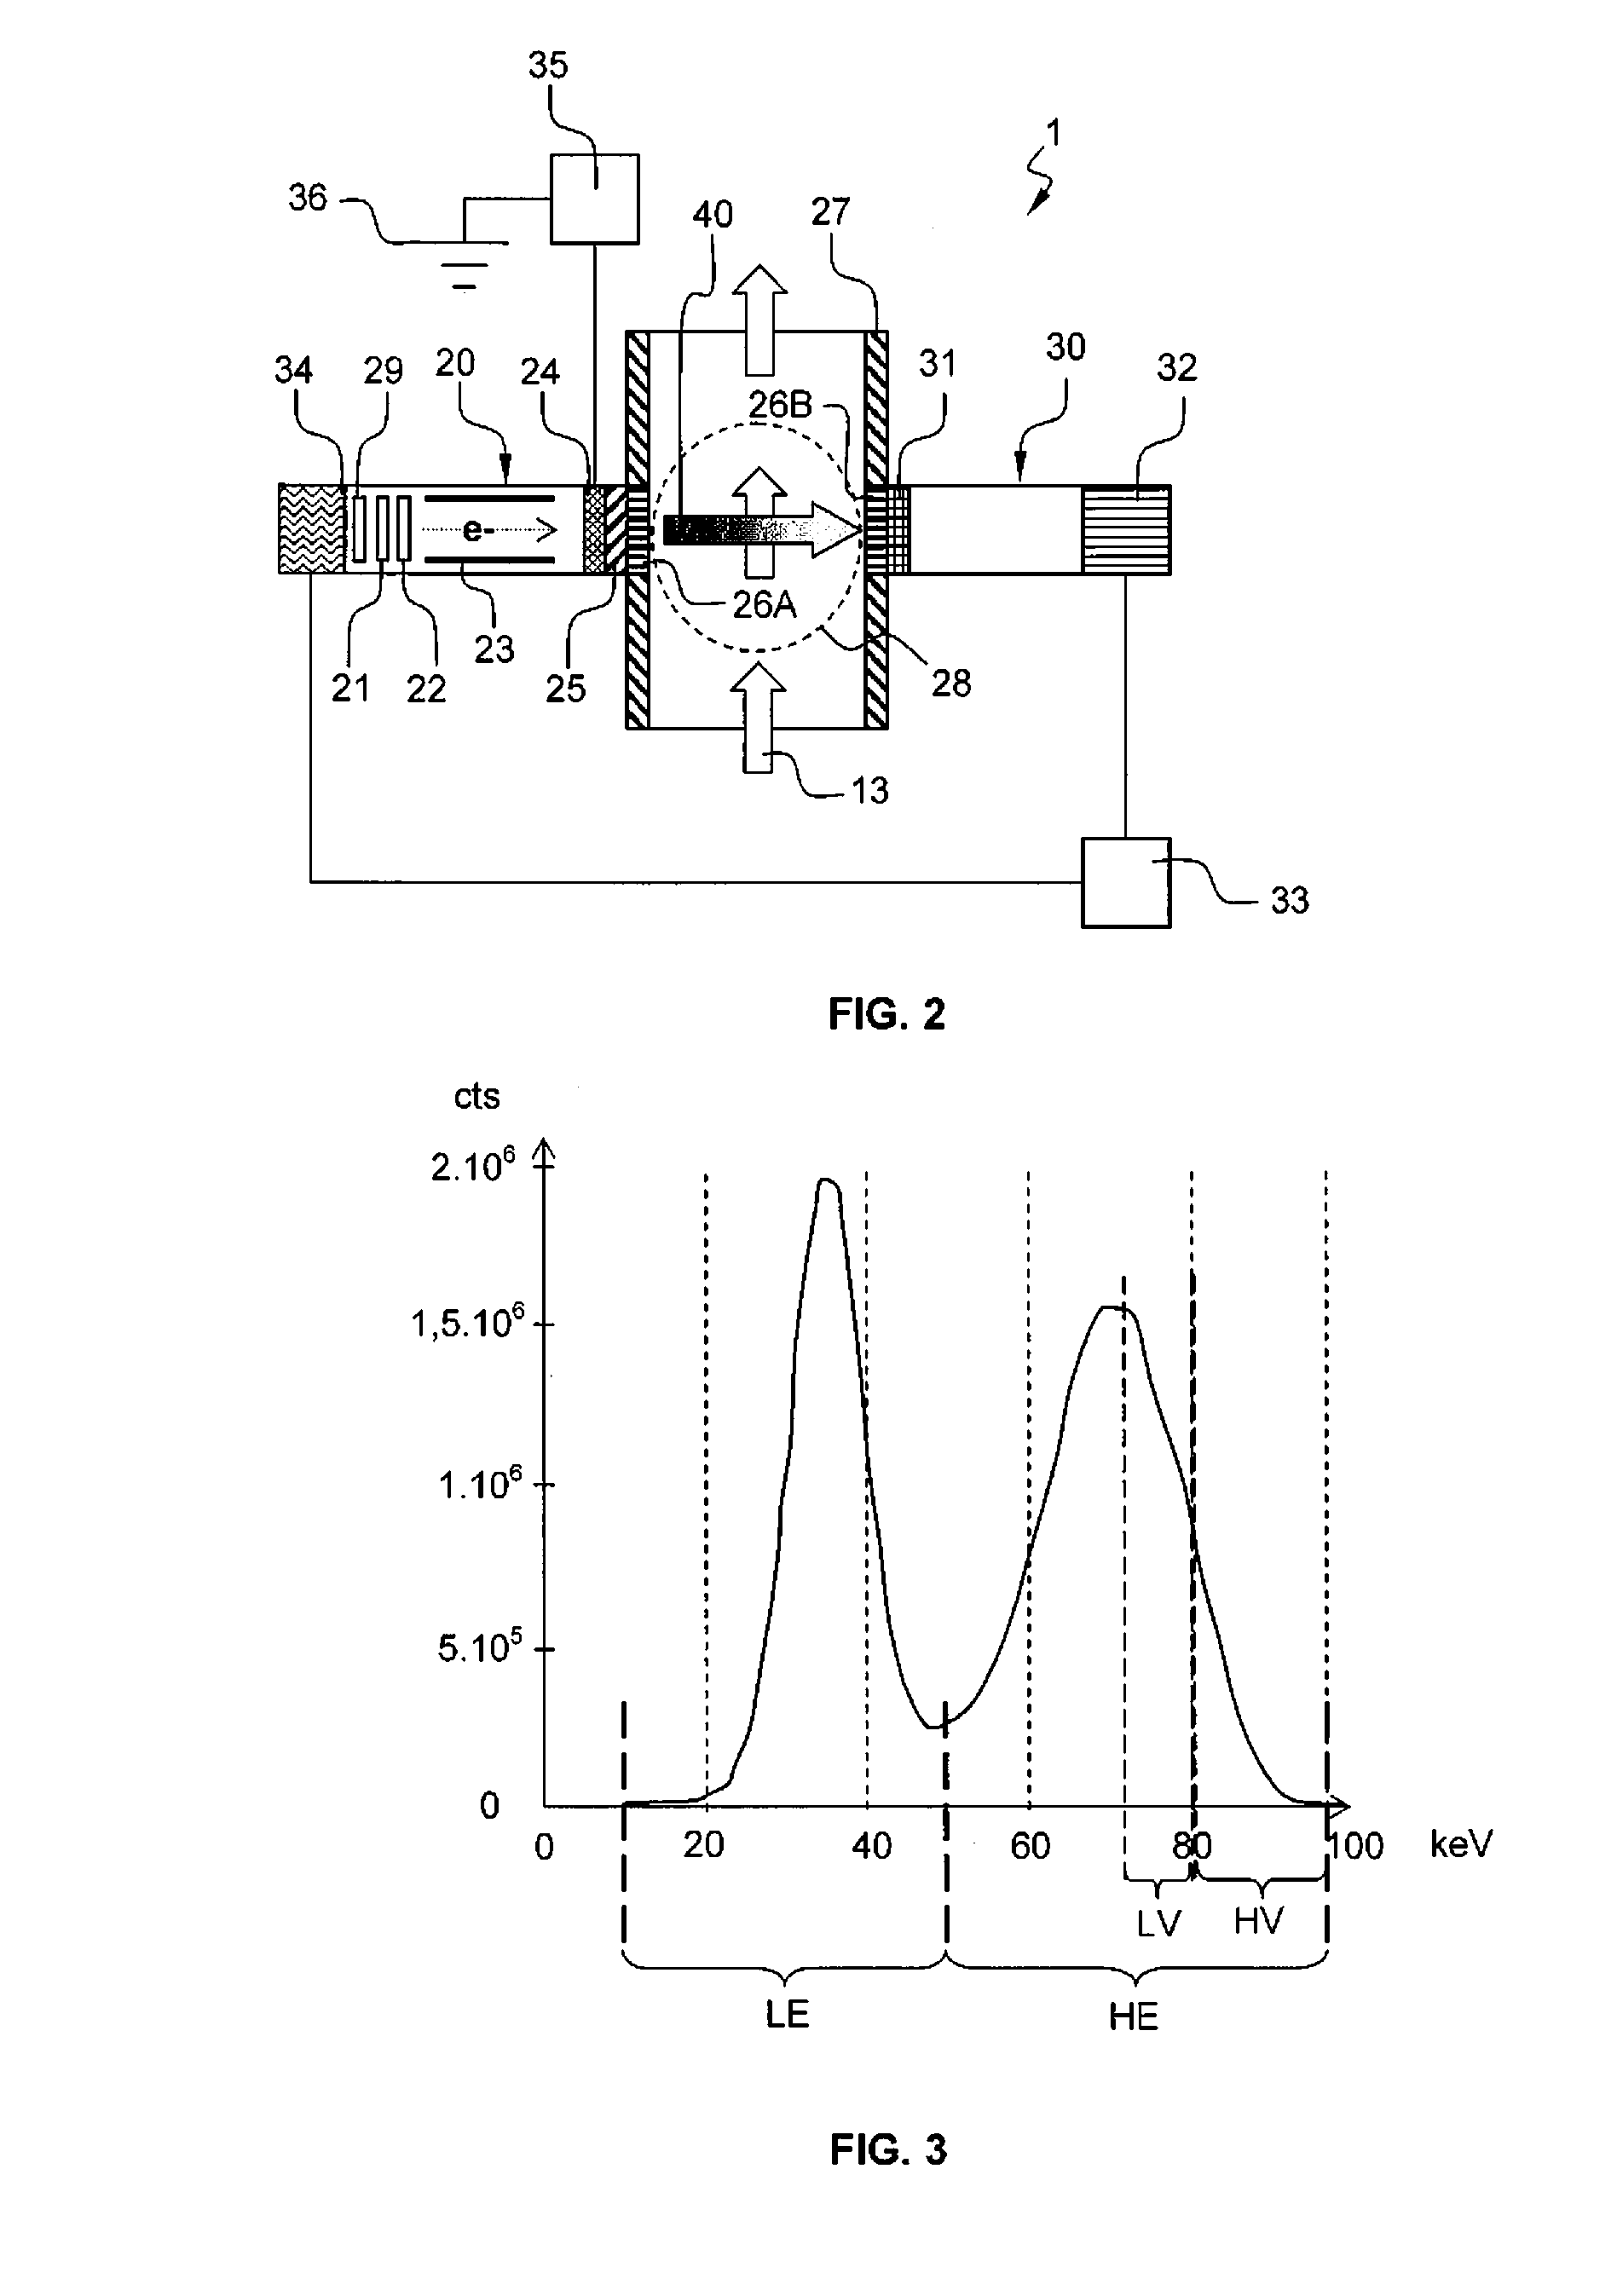 Apparatus and Method for Fluid Phase Fraction Determination Using X-Rays